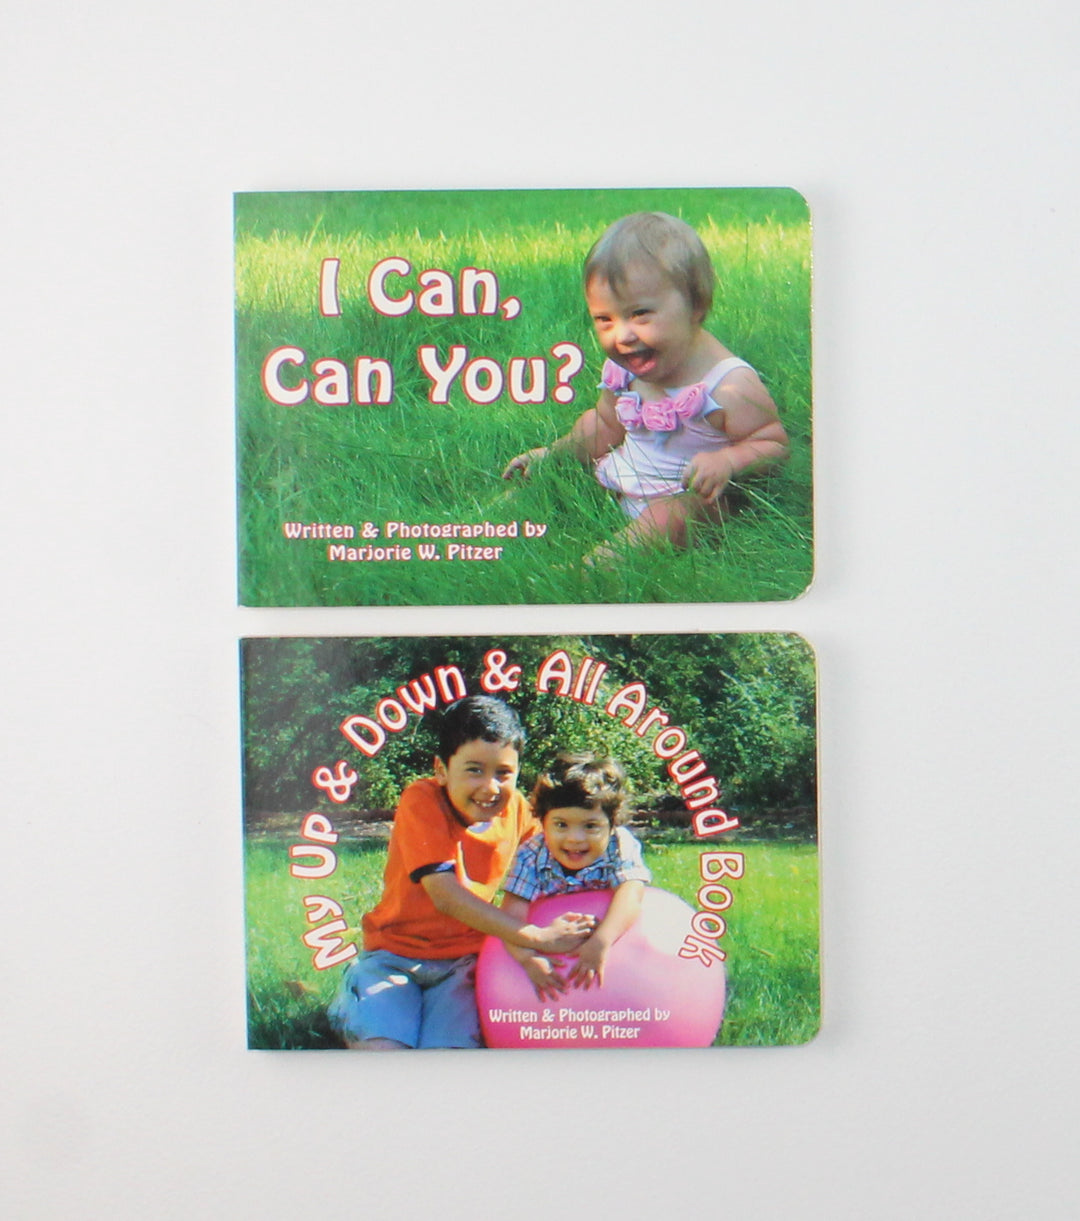 I CAN, CAN YOU// MY UP & DOWN & ALL AROUND SET OF 2 BOARD BOOKS EUC